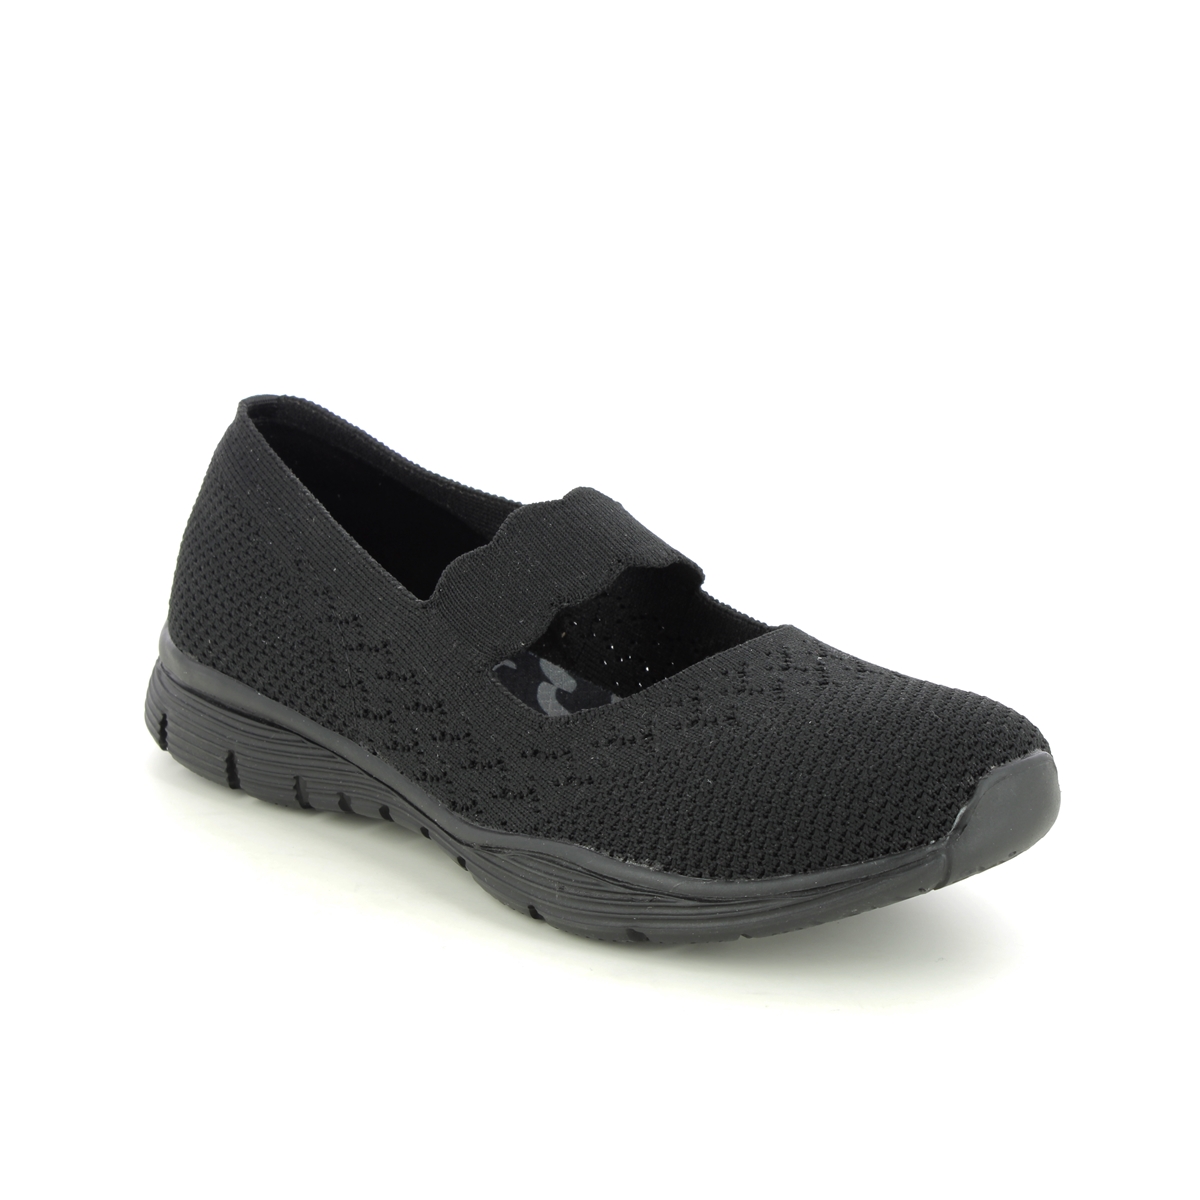 Skechers Seager Power BBK Black Womens Mary Jane Shoes 49622 in a Plain Textile in Size 6